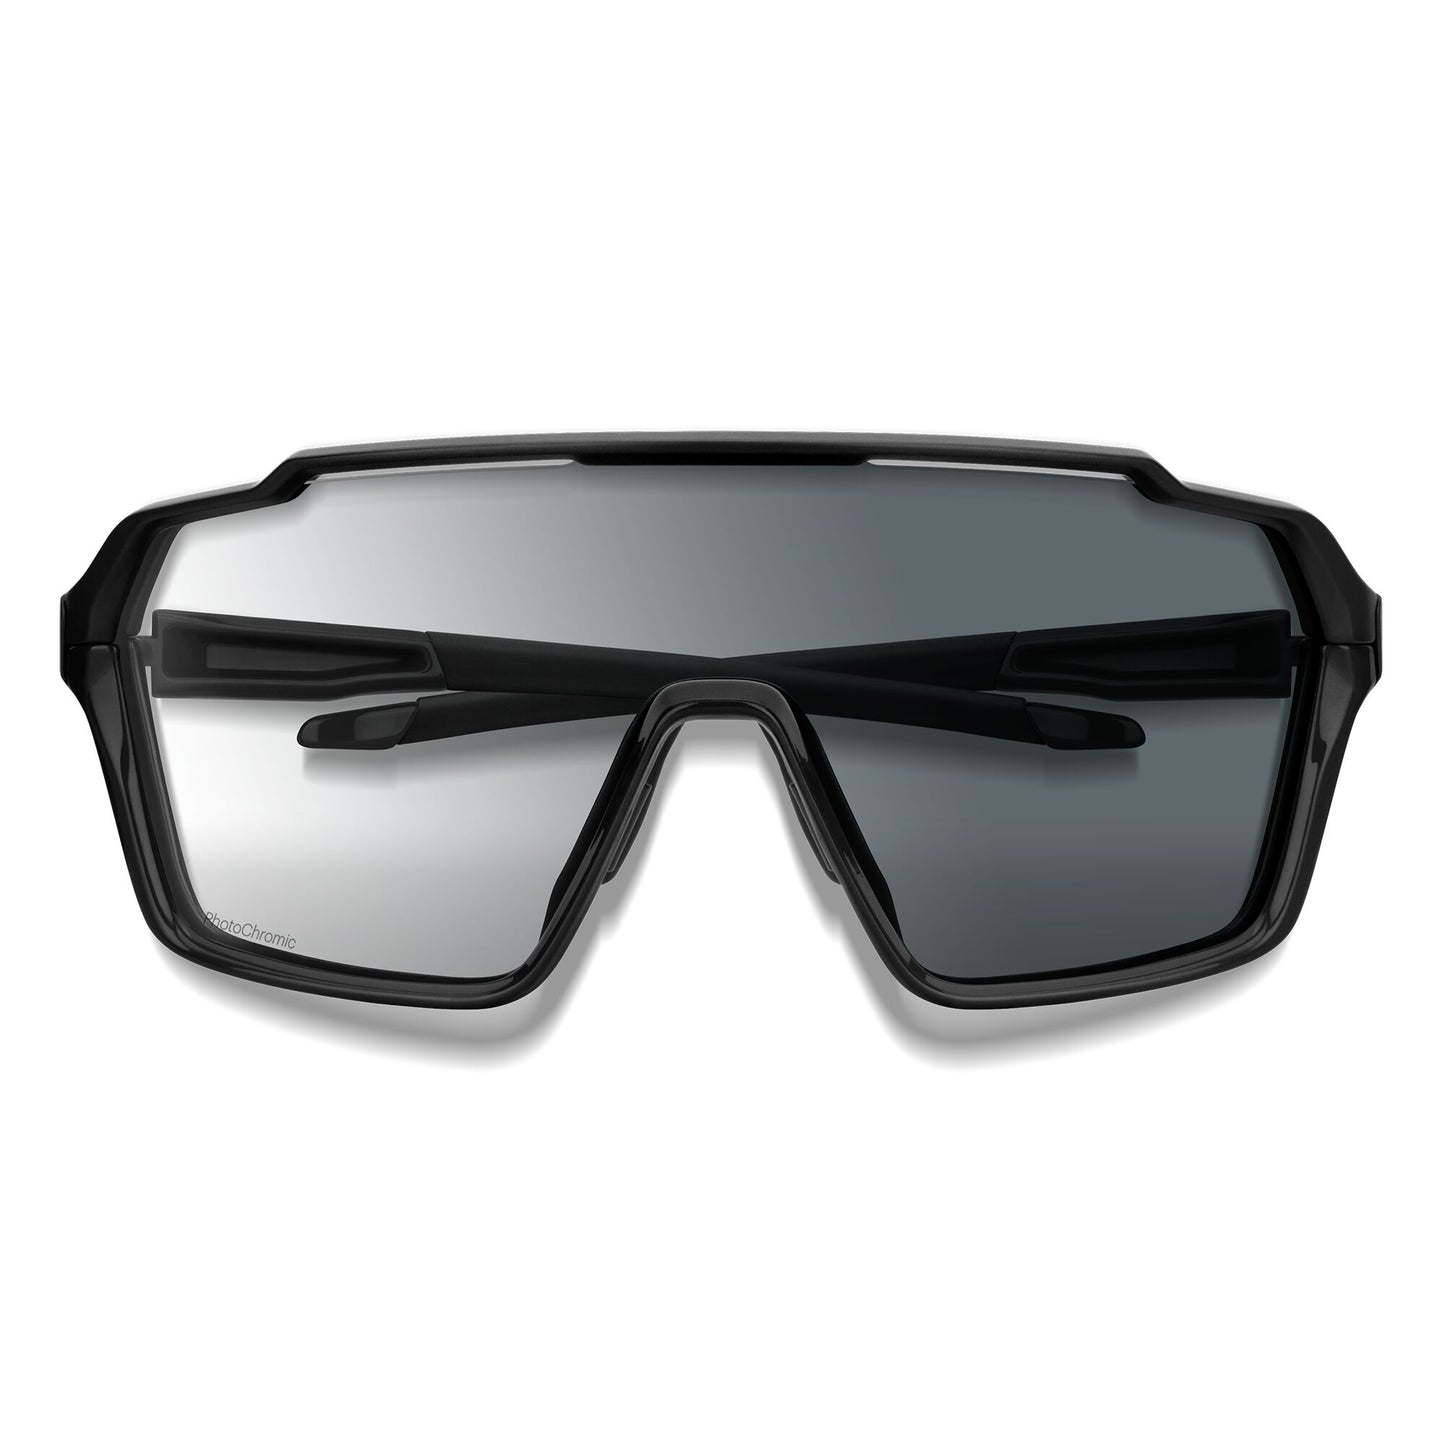 Smith Shift XL Mag Sunglasses - One Size Fits Most - Black - ChromaPop Photochromic Clear To Gray Lens